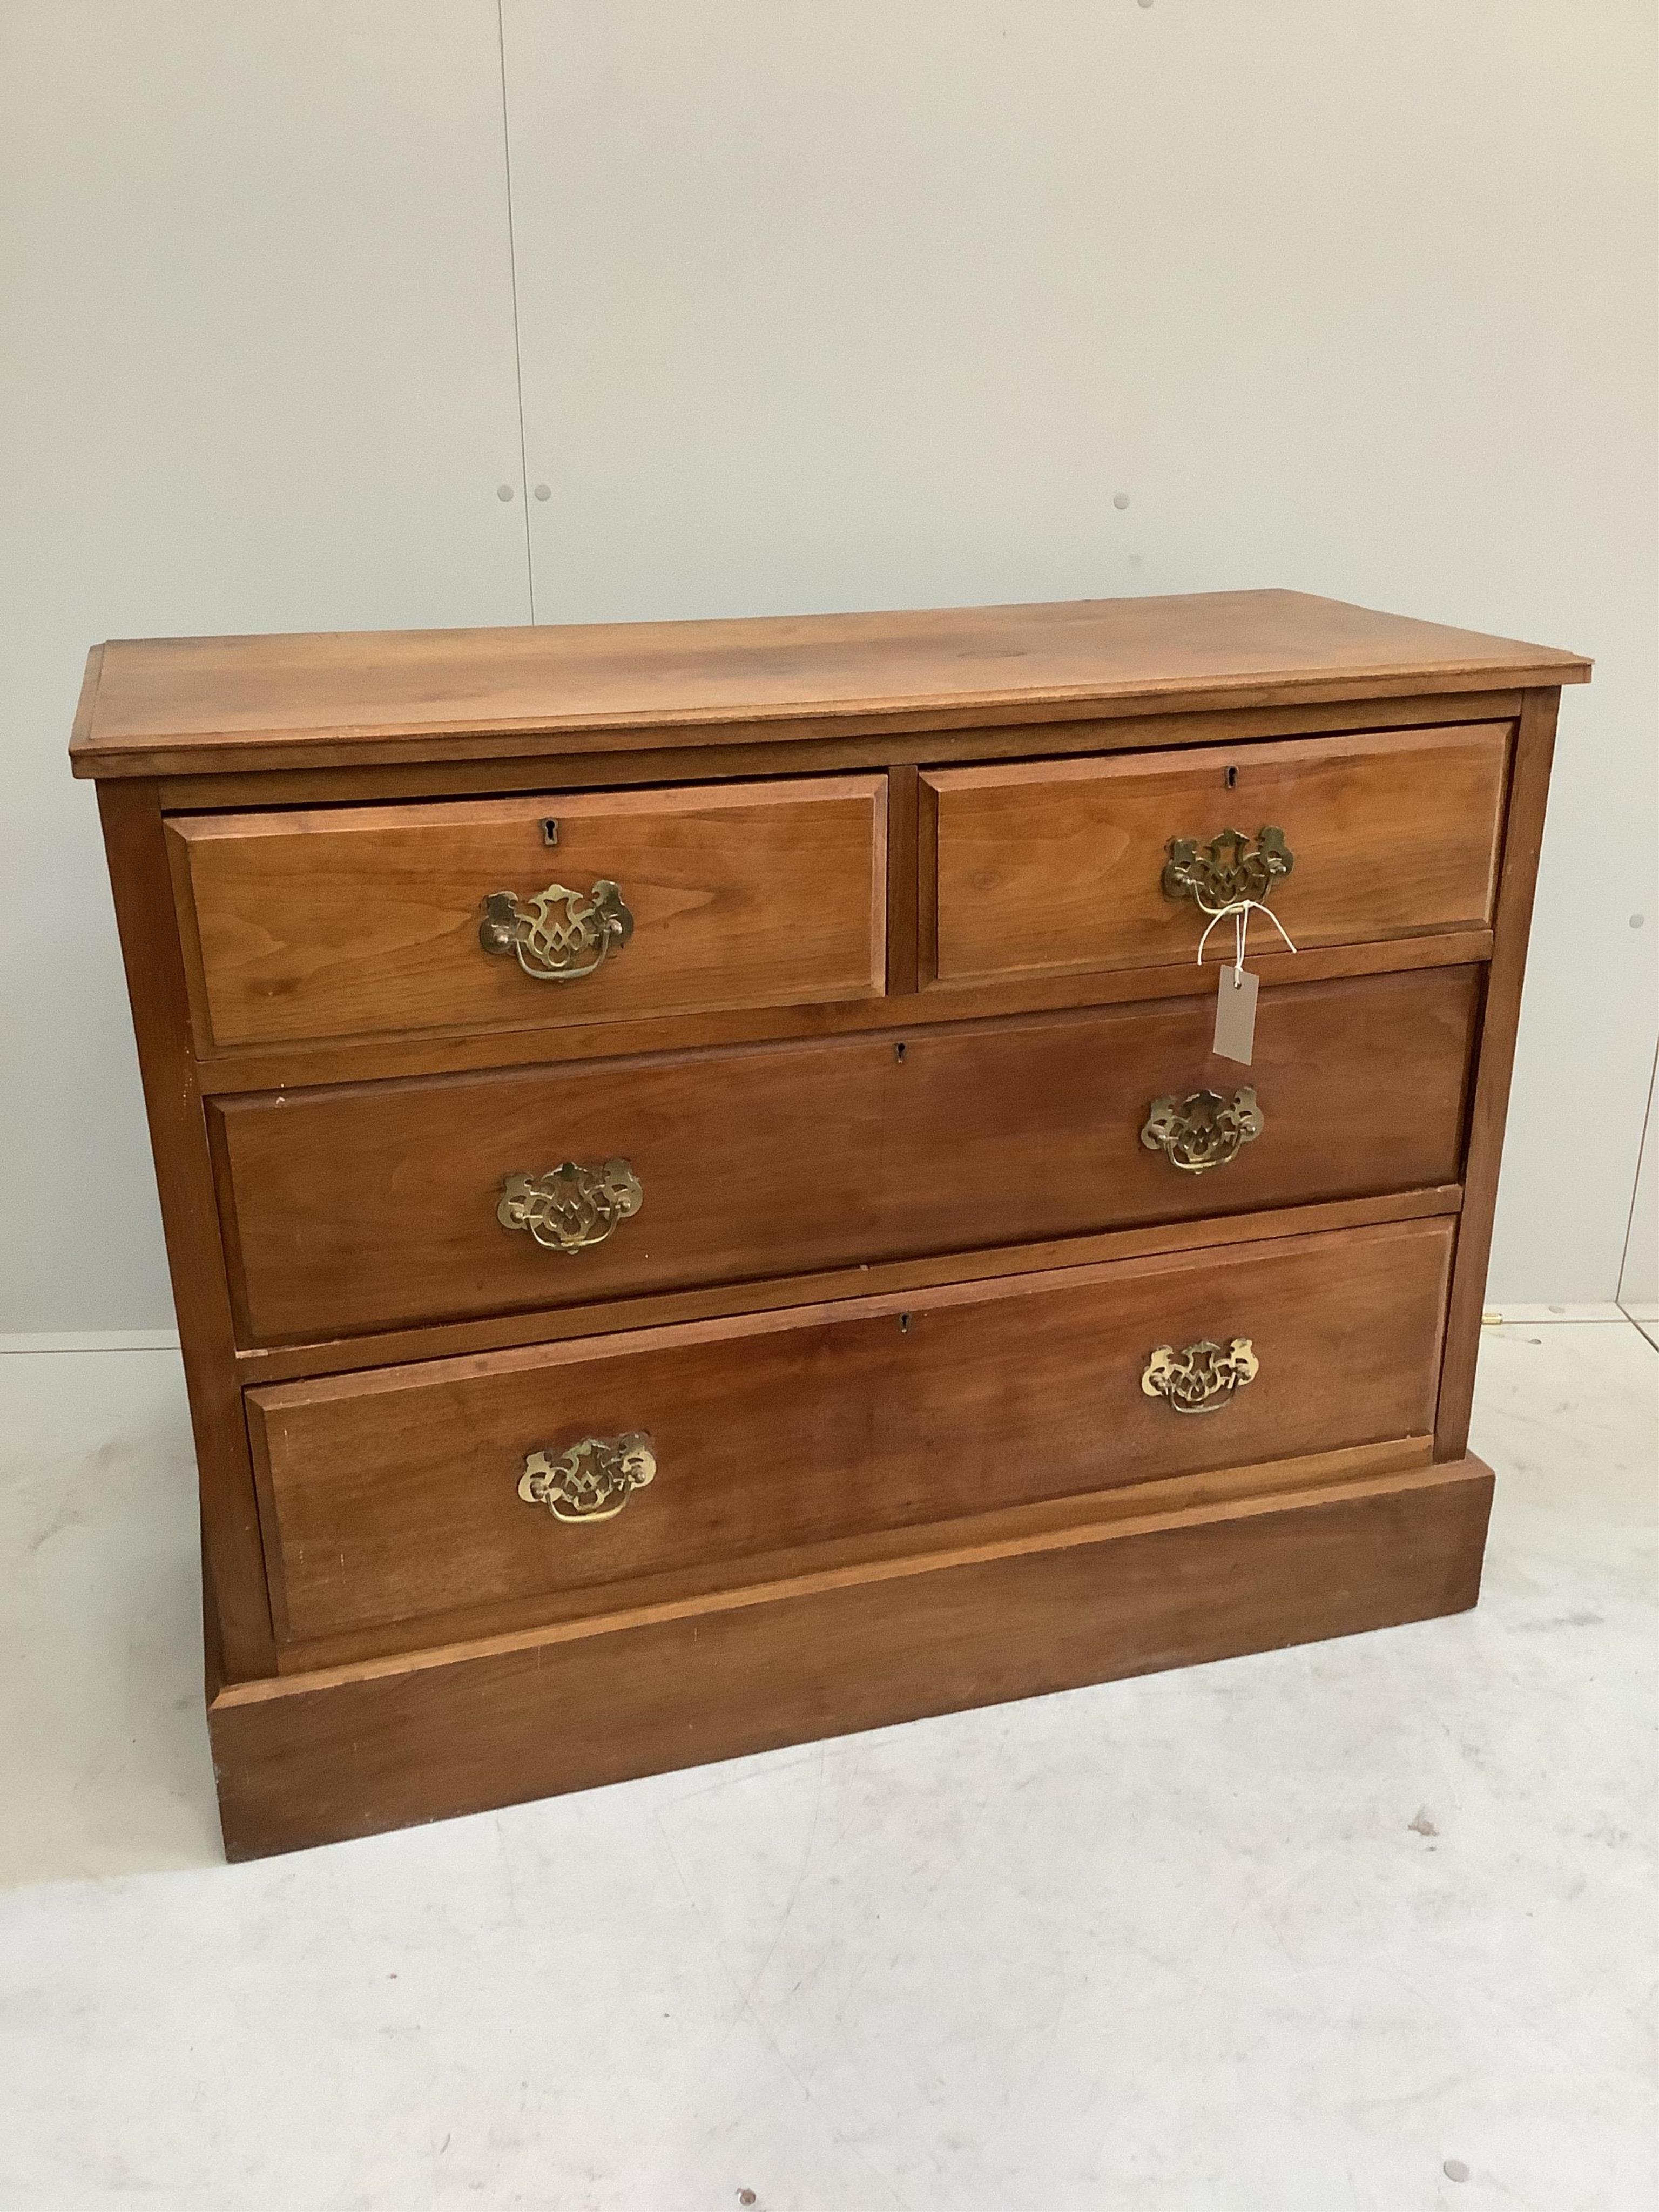 A late Victorian mahogany chest of drawers, width 106cm, depth 45cm, height 84cm. Condition - fair